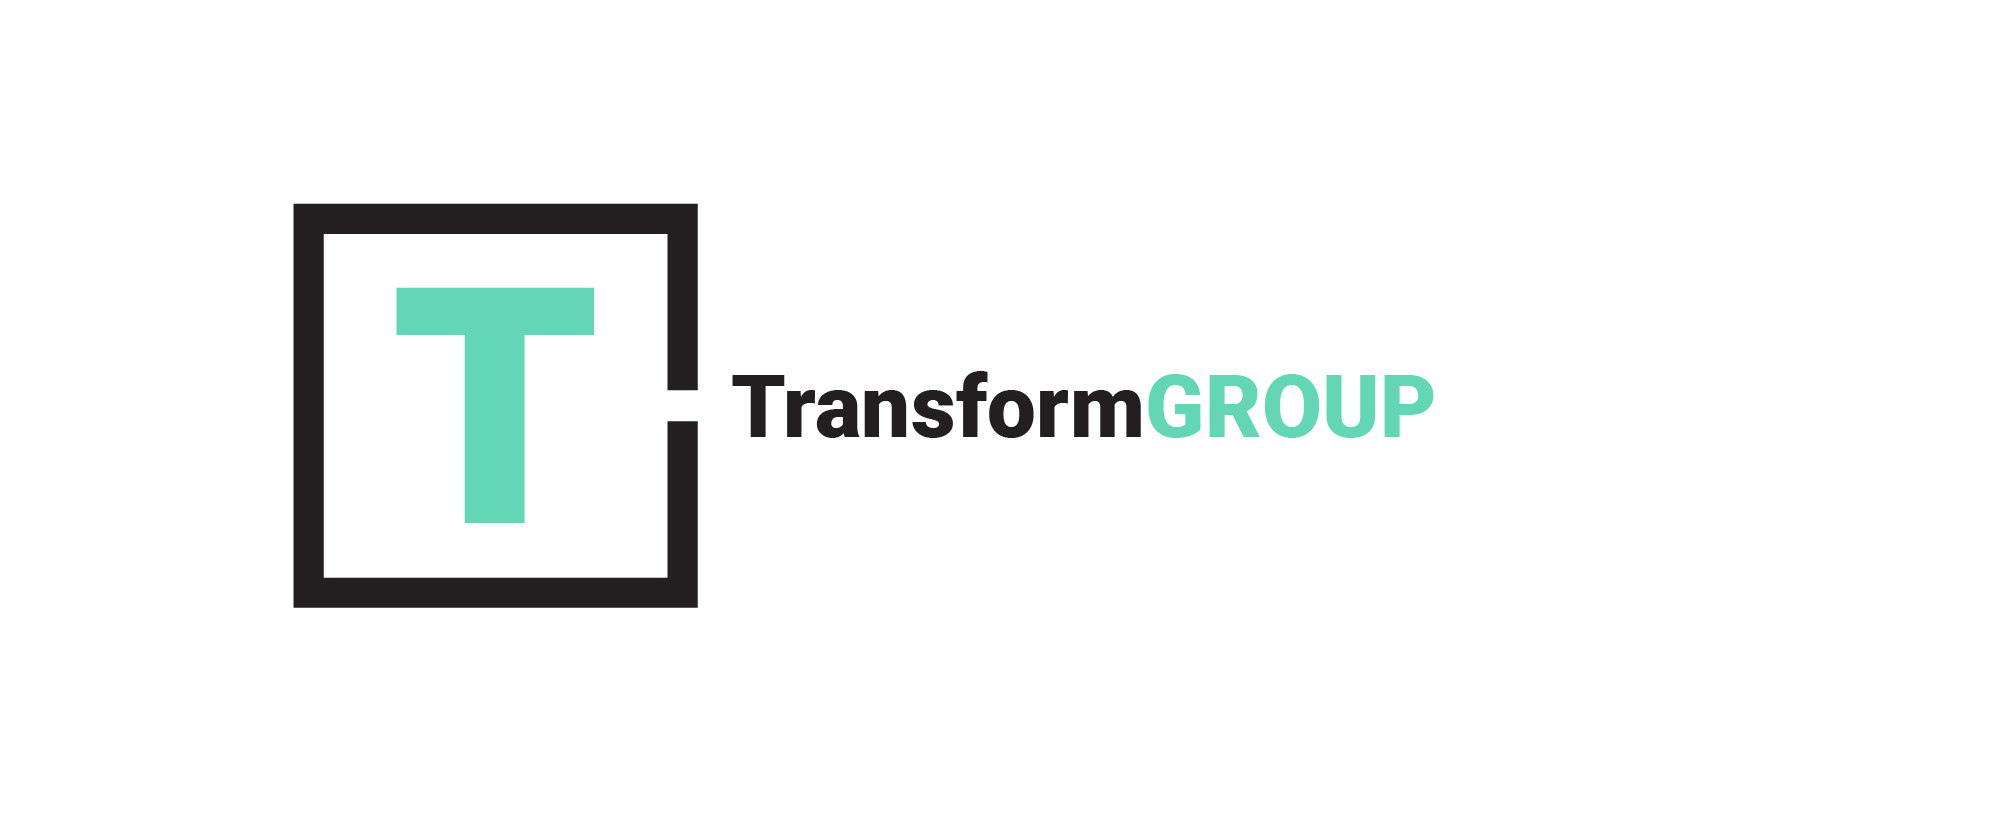 Telos network partners with Transform Group for public relations